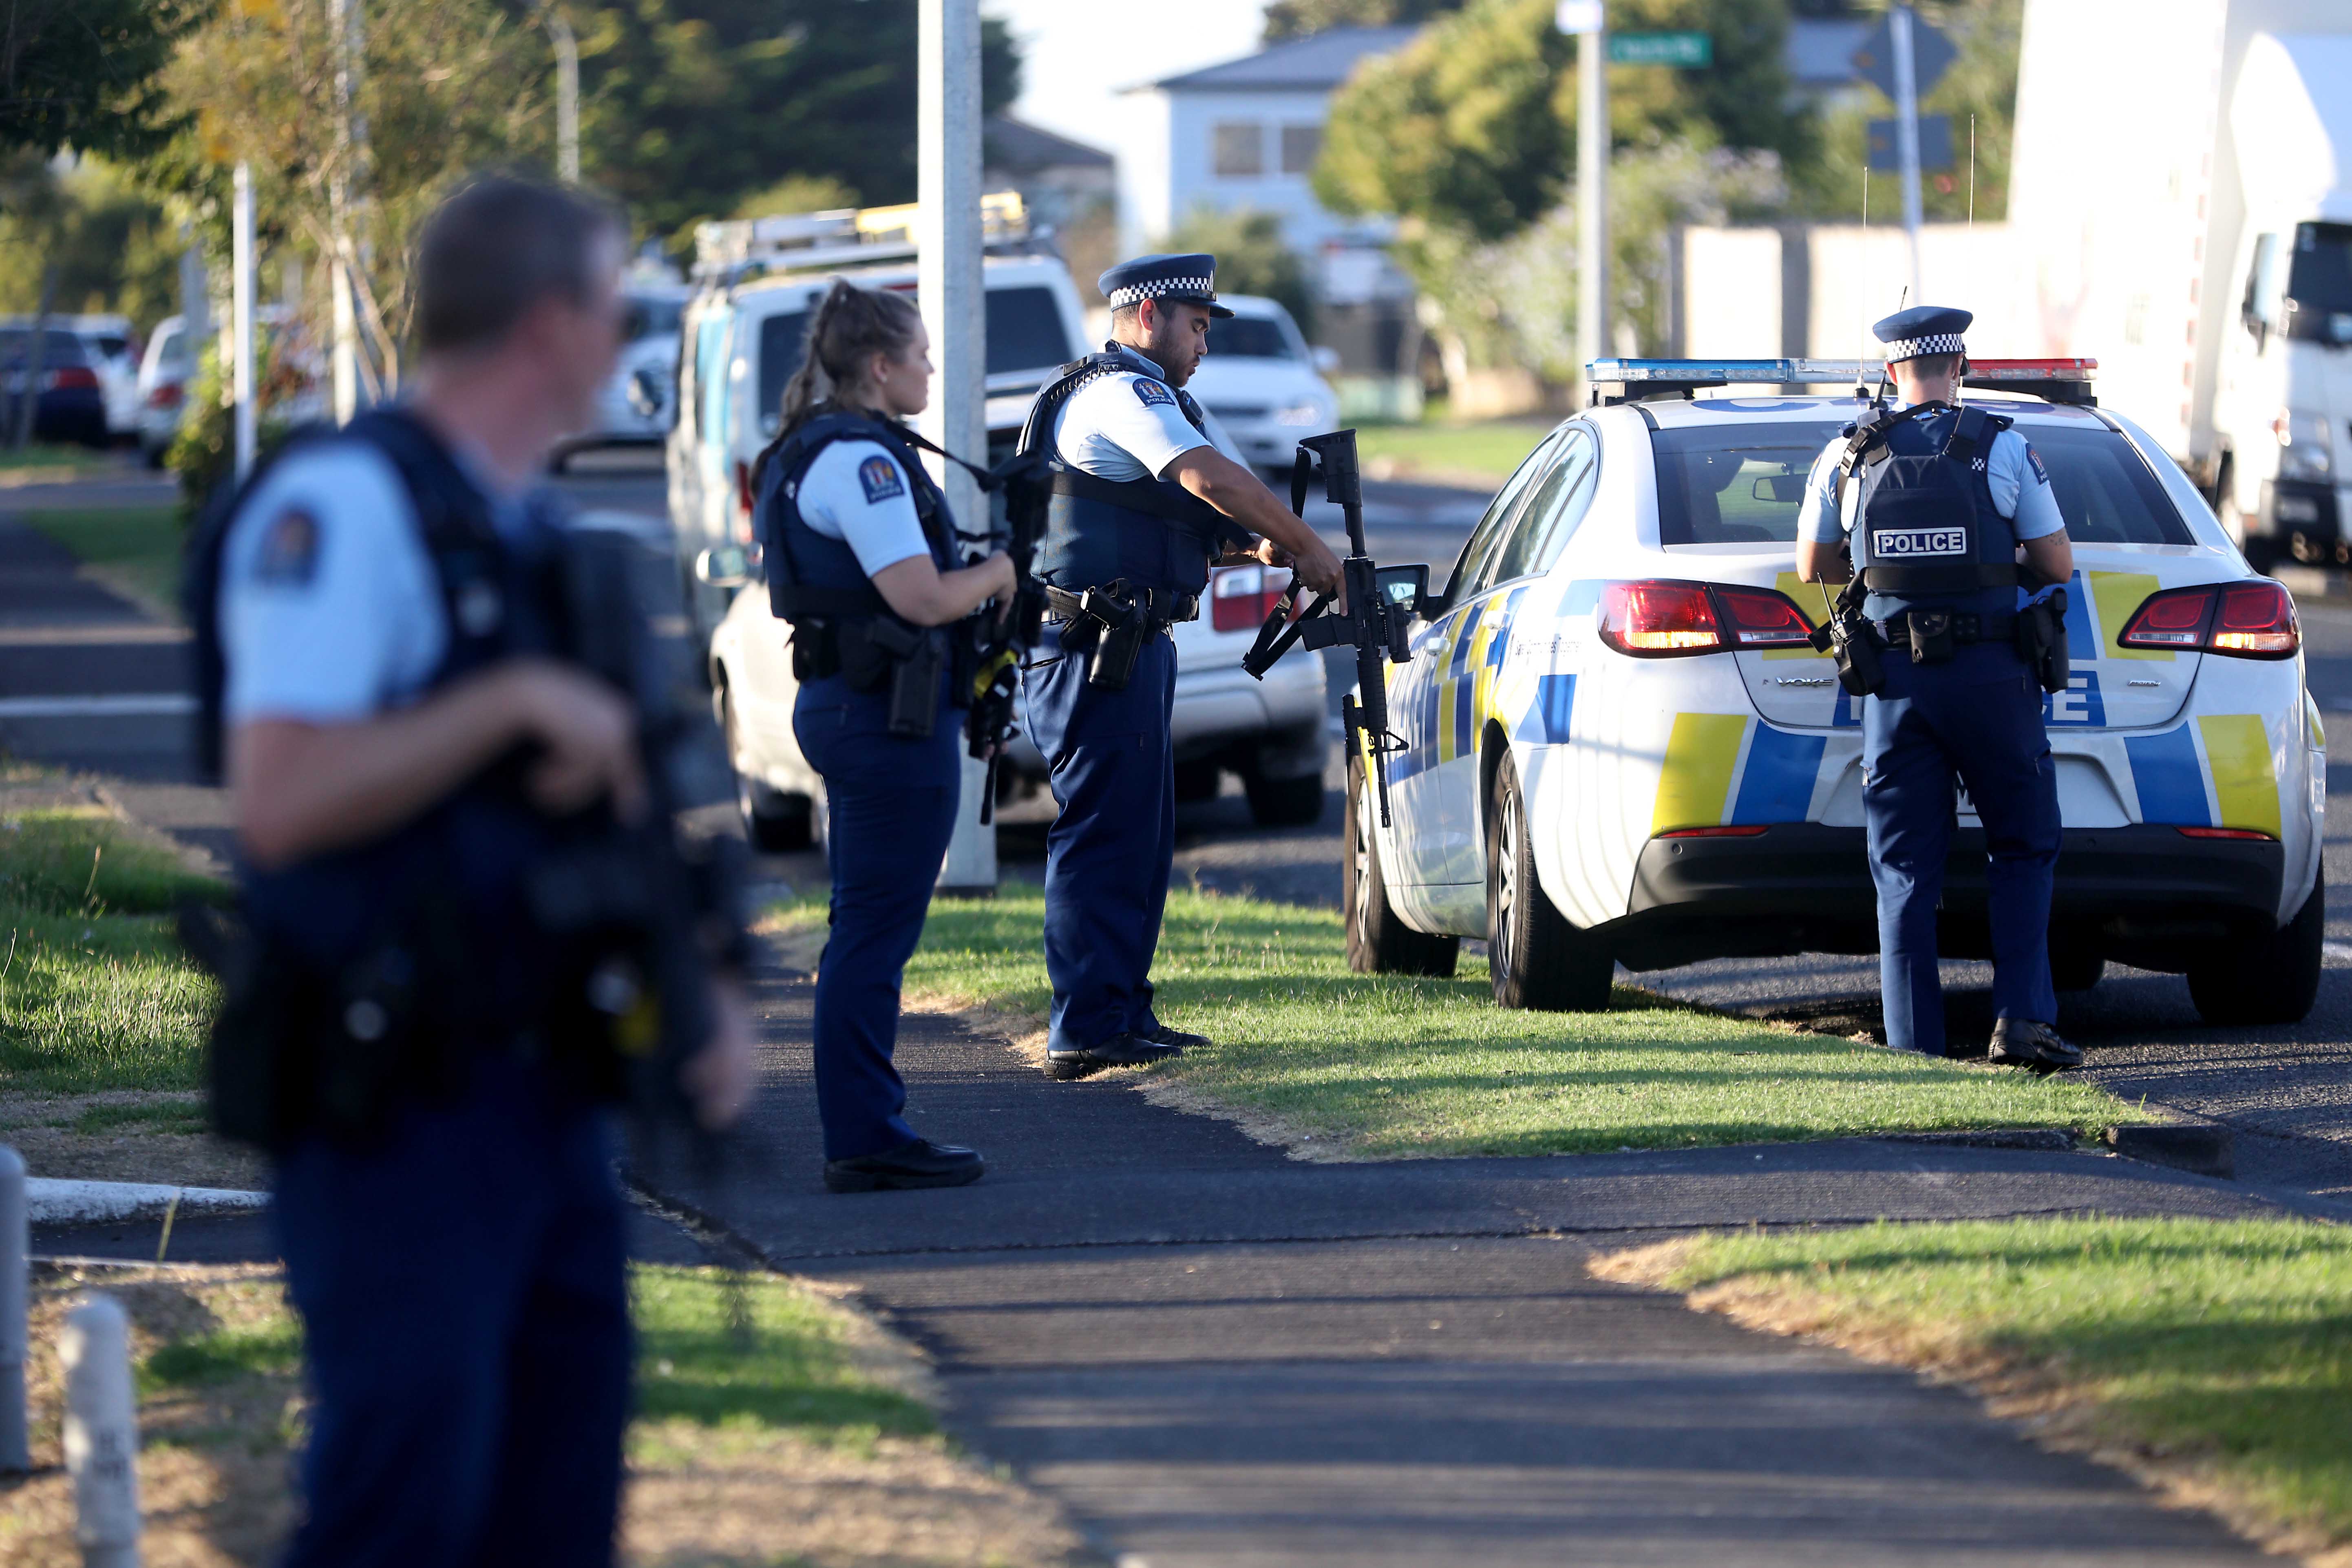 AUCKLAND, NEW ZEALAND - MARCH 15: Armed police maintain a presence outside the Masijd Ayesha Mosque in Manurewa on March 15, 2019 in Auckland, New Zealand. Four people are in custody following shootings at two mosques in Christchurch this afternoon, and the number of fatalities has yet to be confirmed. New Zealanders have been urged to not attend evening prayers today following the attacks. (Photo by Phil Walter/Getty Images)